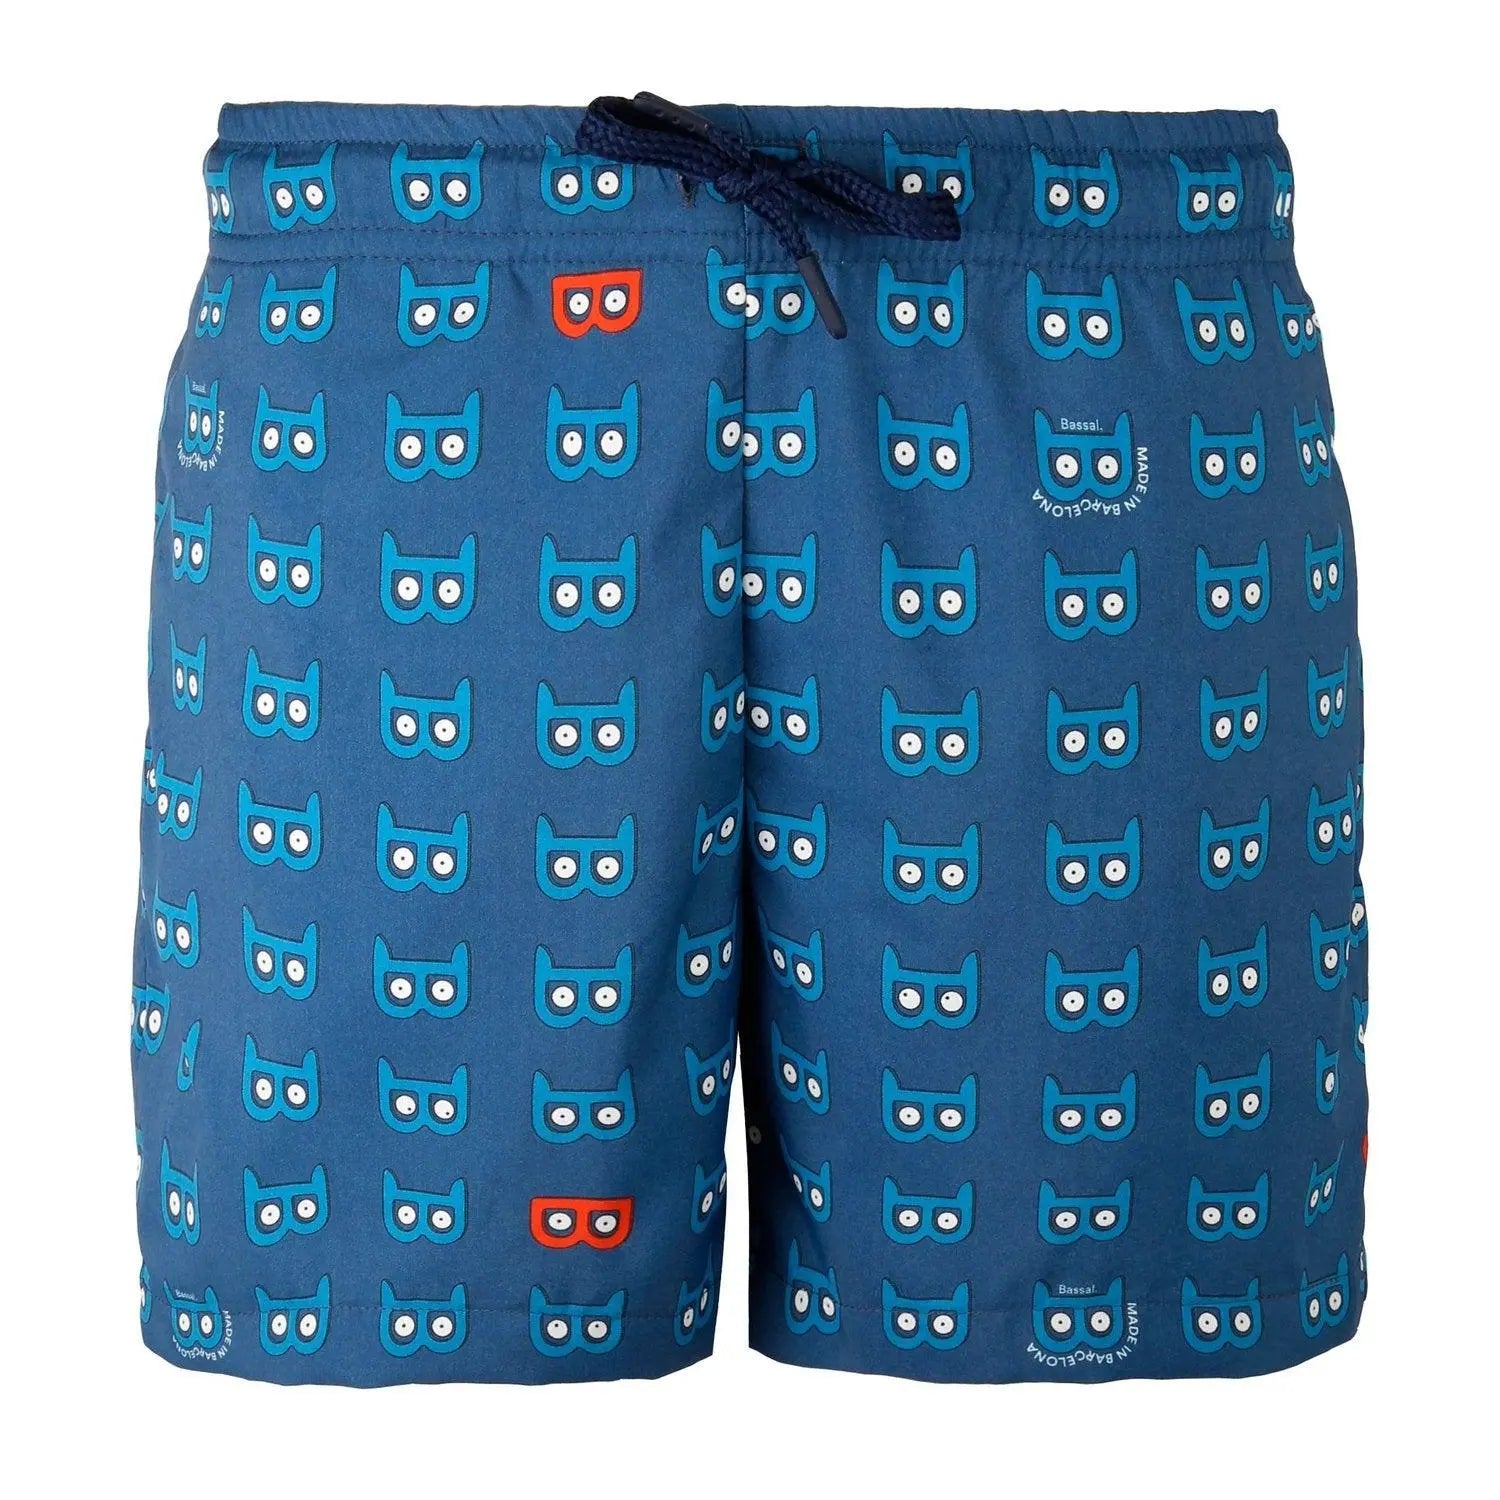 A pair of blue Mask Kids Swimwear with a cute owl pattern, neatly folded in an orange-bordered white box. A tag with the brand name "Bassal" and a plastic zipper bag are visible. The brand's name "Bassalstore" is printed on the box, showcasing its Barcelona roots.